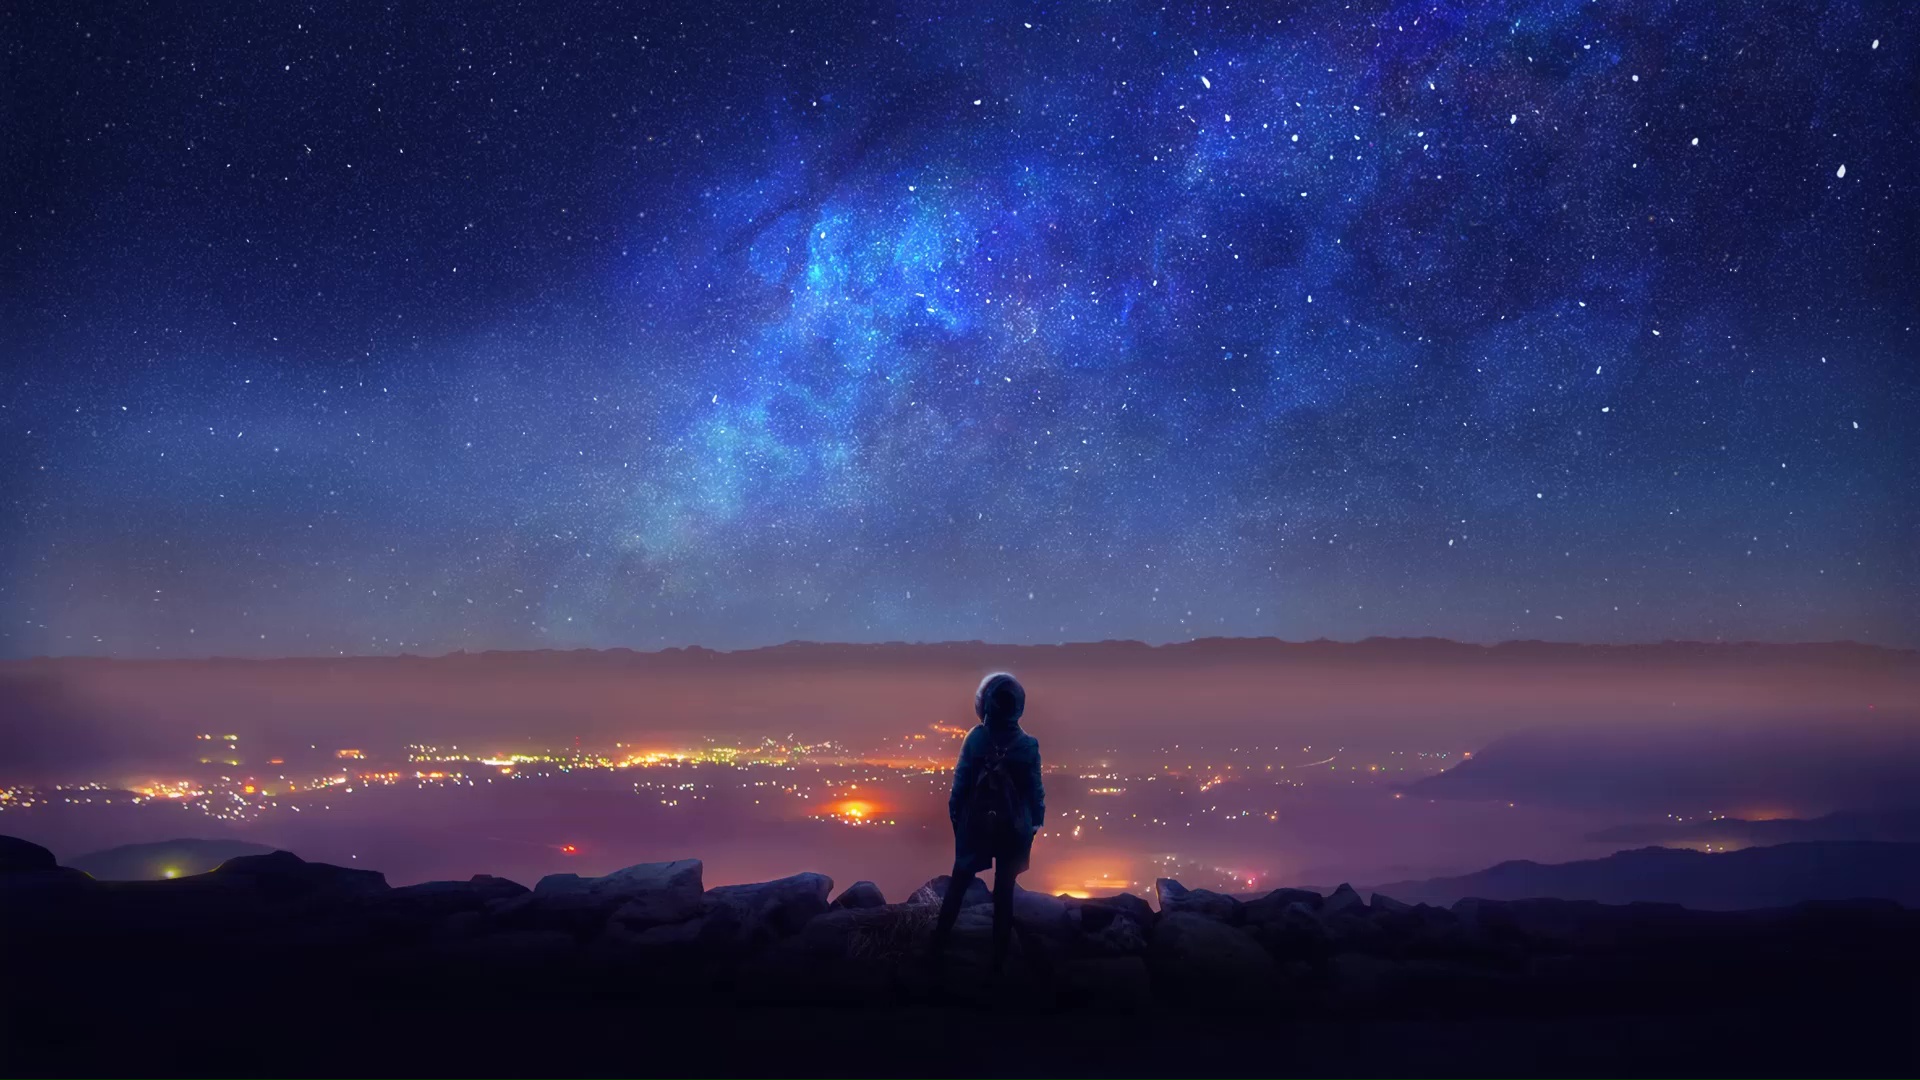 The Boy Staring Into The Night Sky Live Wallpaper - MoeWalls